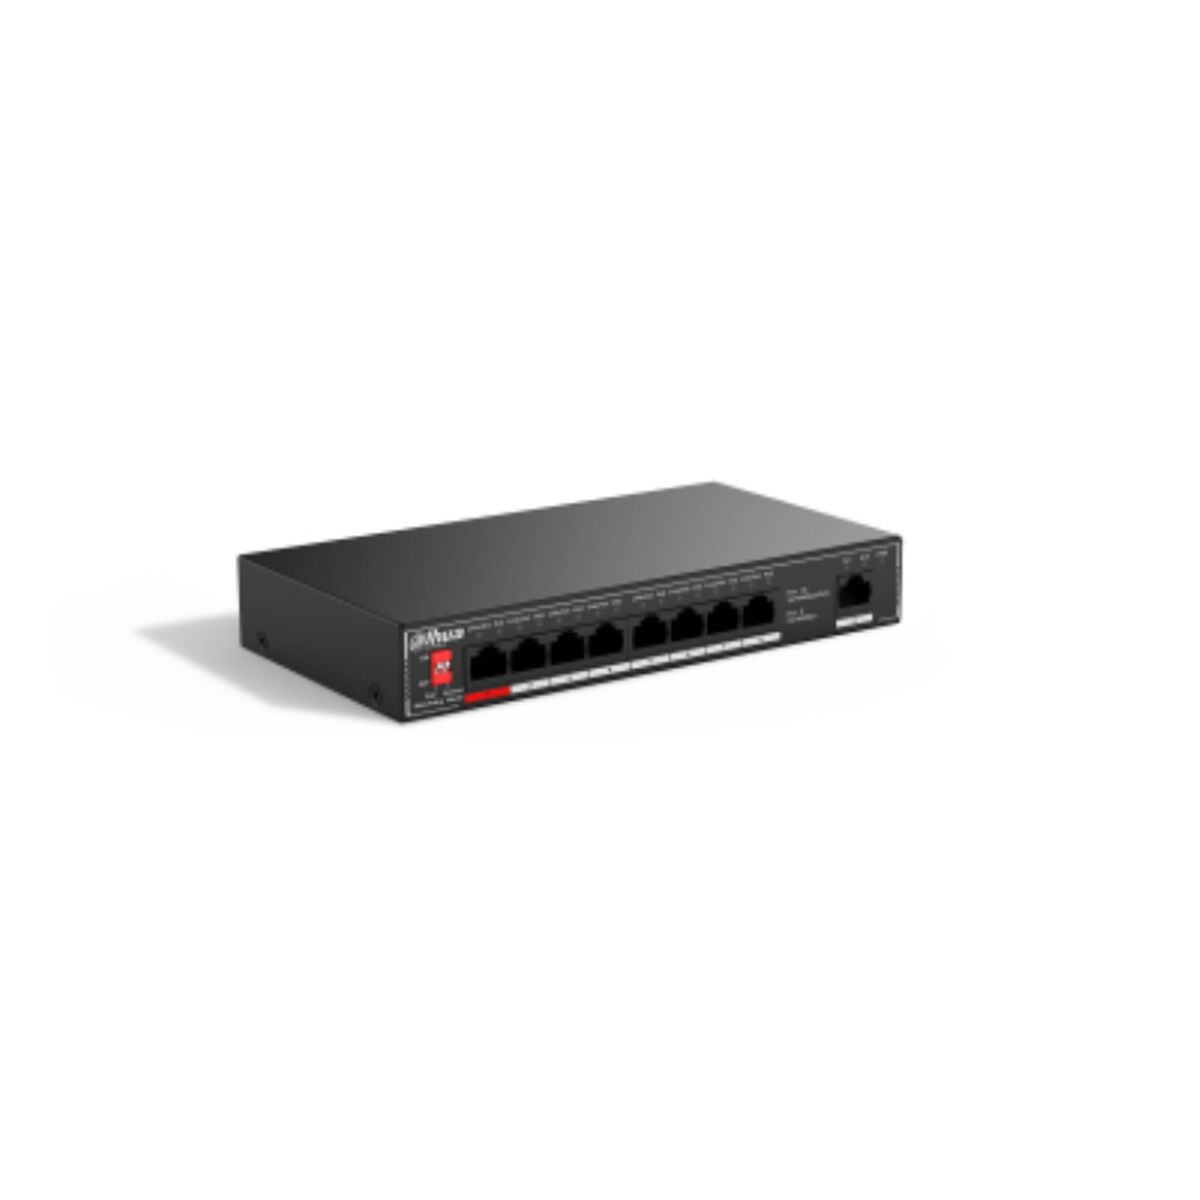 Switch DAHUA TECHNOLOGY DH-SF1009P, DAHUA TECHNOLOGY, Computing, Network devices, switch-dahua-technology-dh-sf1009p, Brand_DAHUA TECHNOLOGY, category-reference-2609, category-reference-2803, category-reference-2827, category-reference-t-19685, category-reference-t-19914, category-reference-t-21367, Condition_NEW, networks/wiring, Price_50 - 100, Teleworking, RiotNook